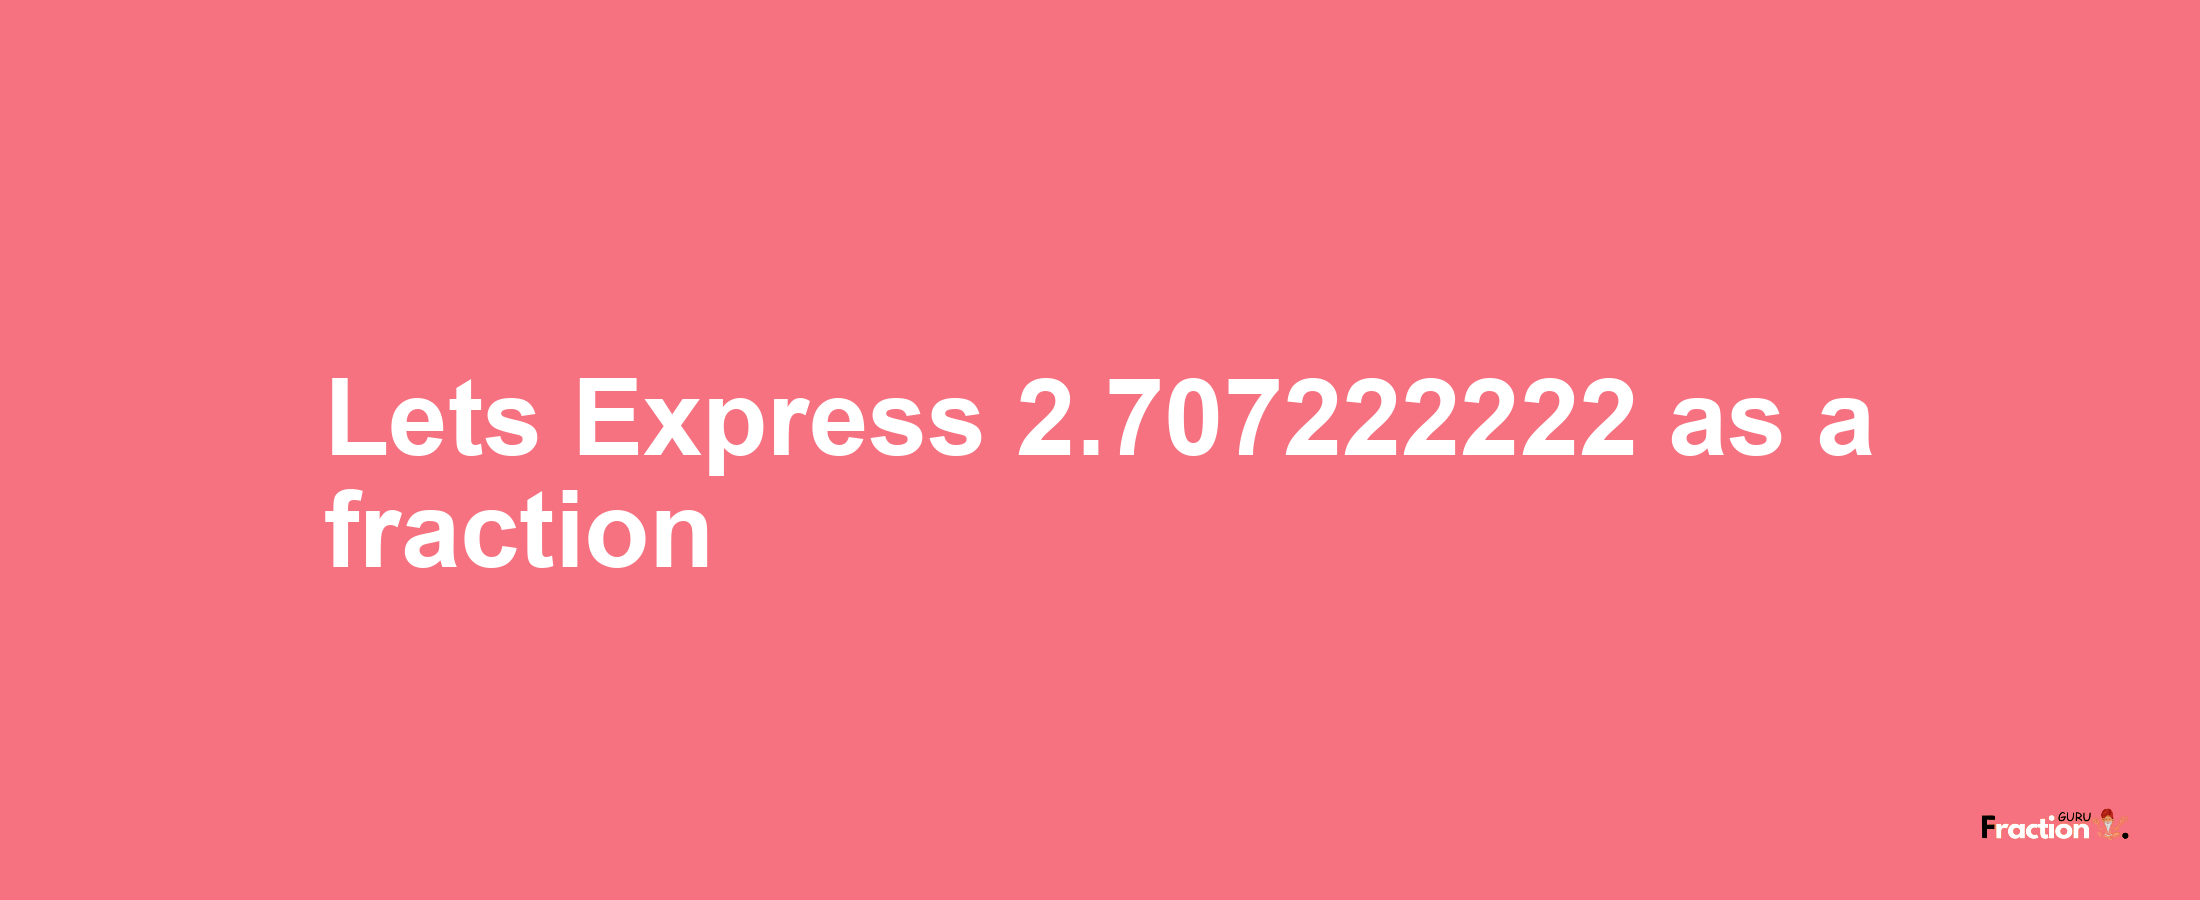 Lets Express 2.707222222 as afraction